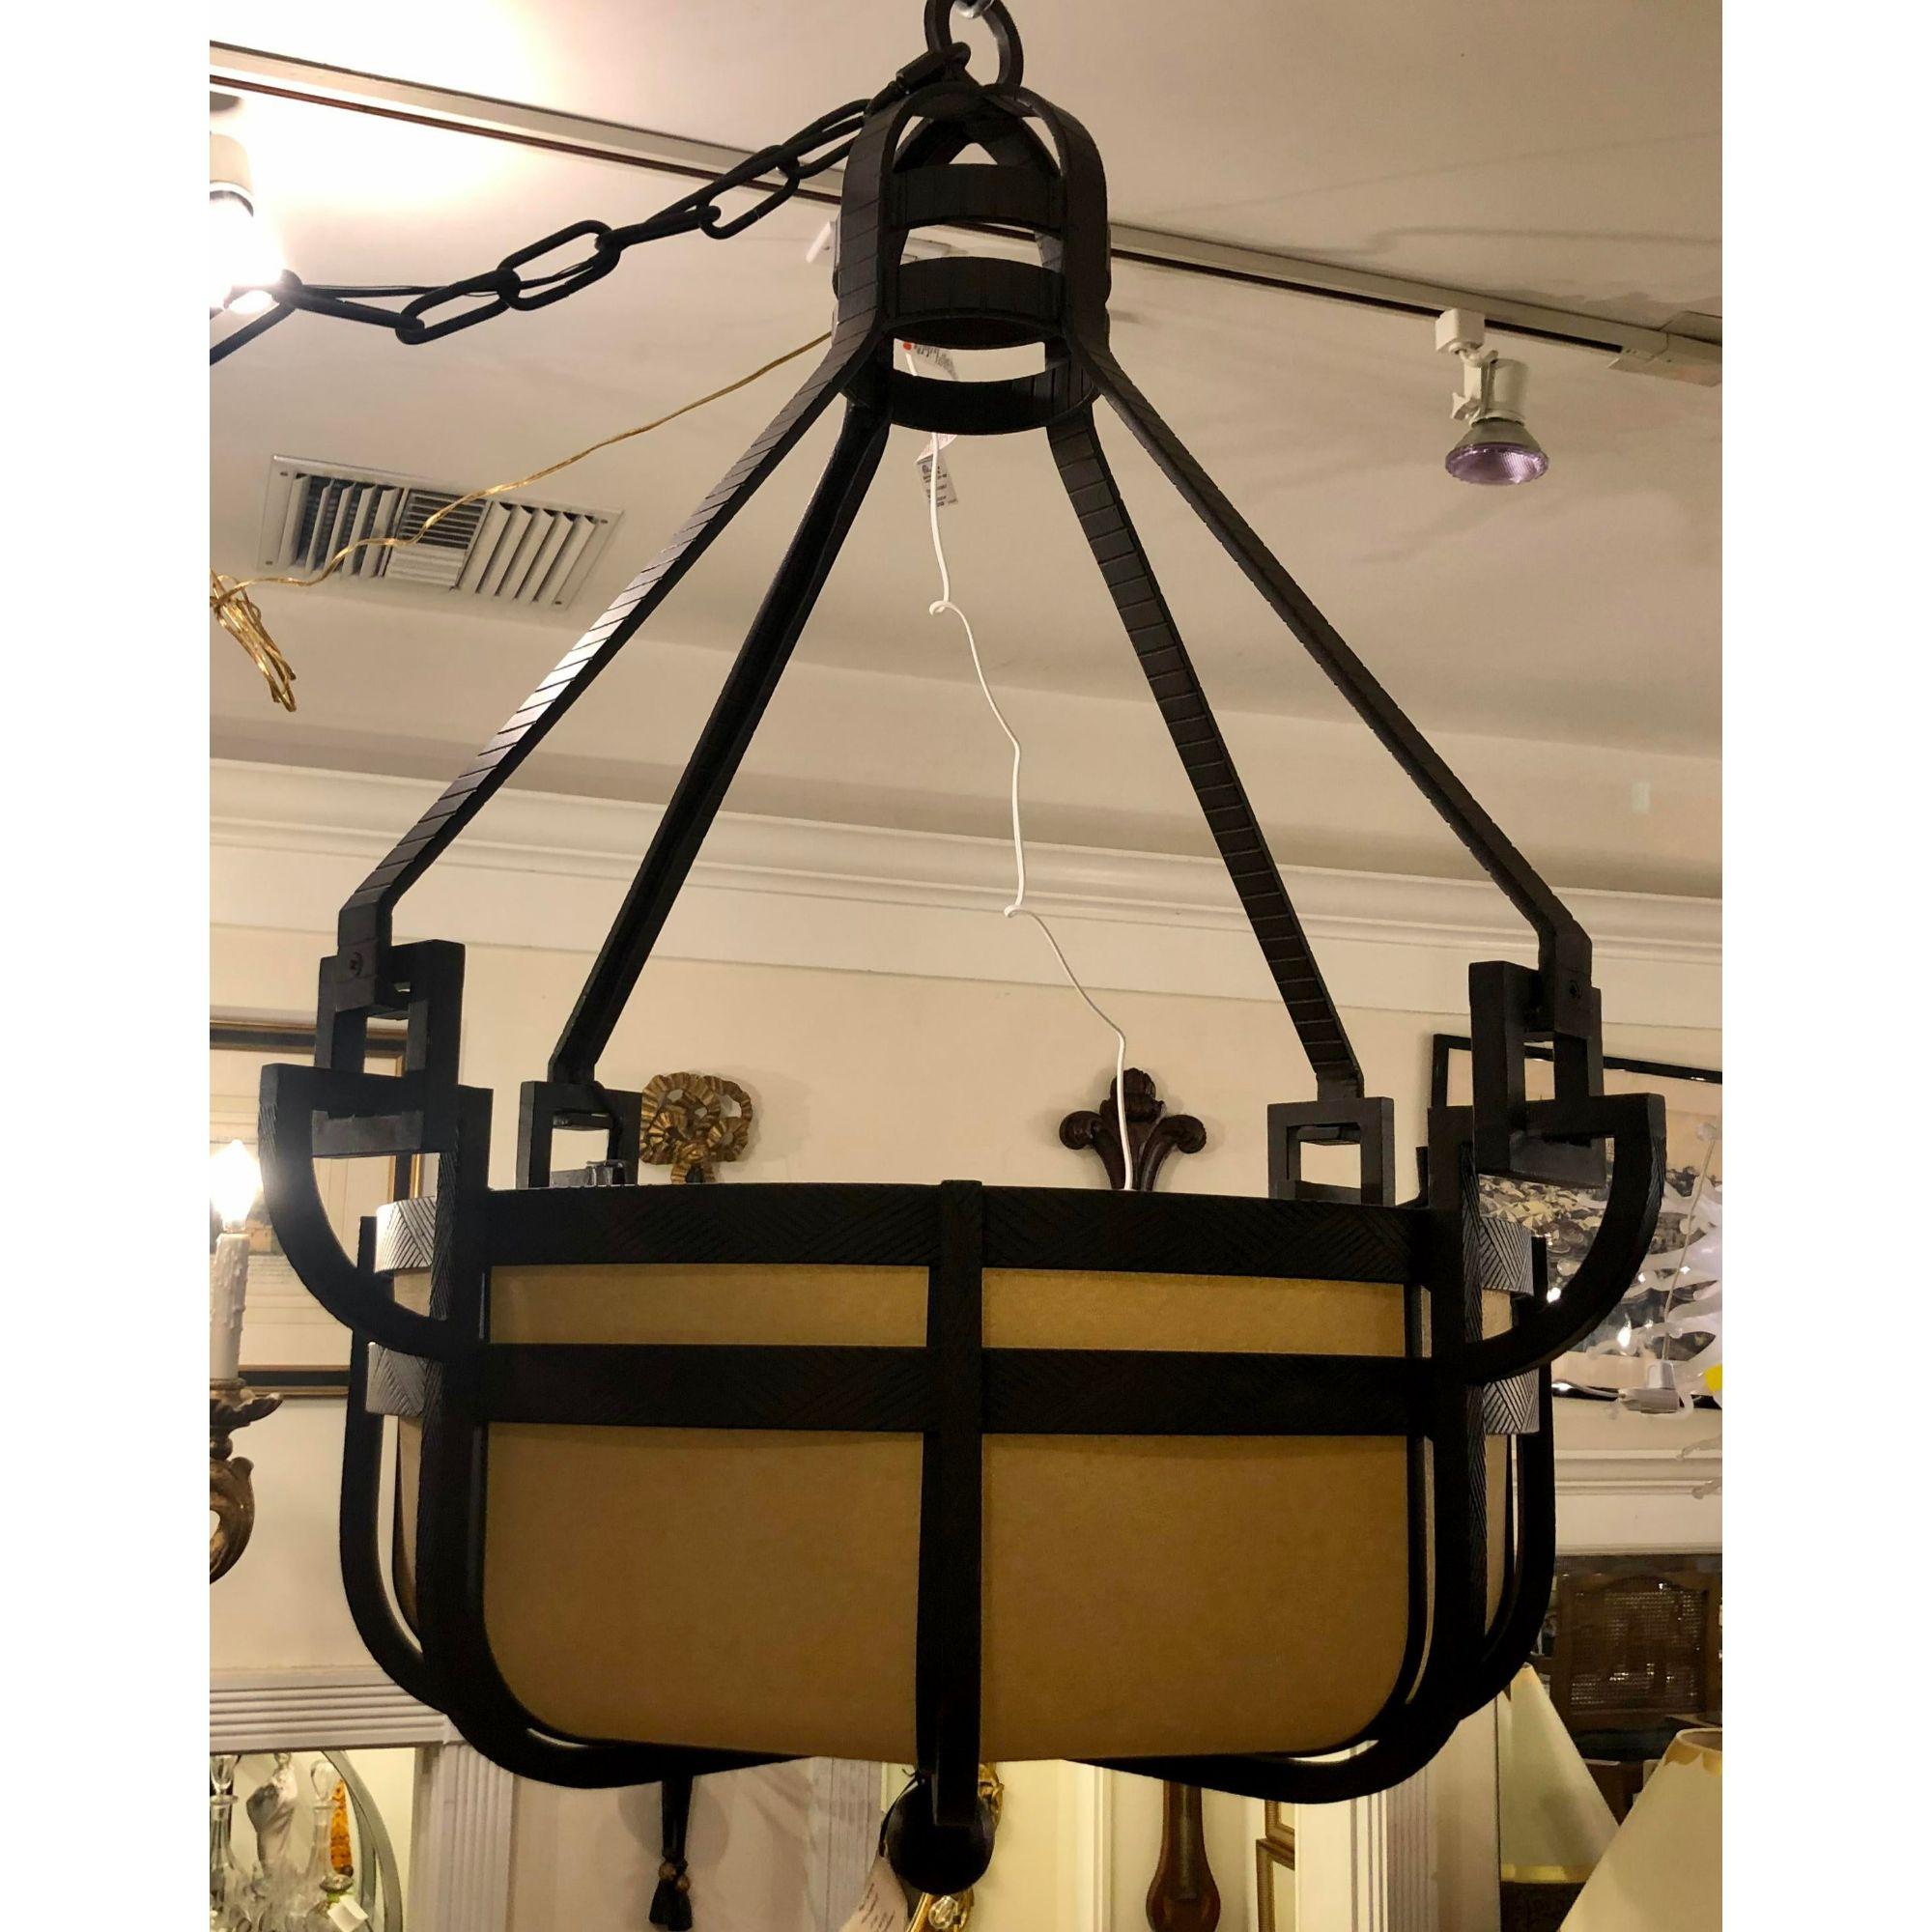 Paul ferrante pounded wrought iron Manhattan III chandelier.

Additional information: 
Materials: Wrought Iron.
Color: Black.
Brand: Paul Ferrante.
Designer: Paul Ferrante.
Period: 2000 - 2009.
Place of Origin: North America.
Styles: